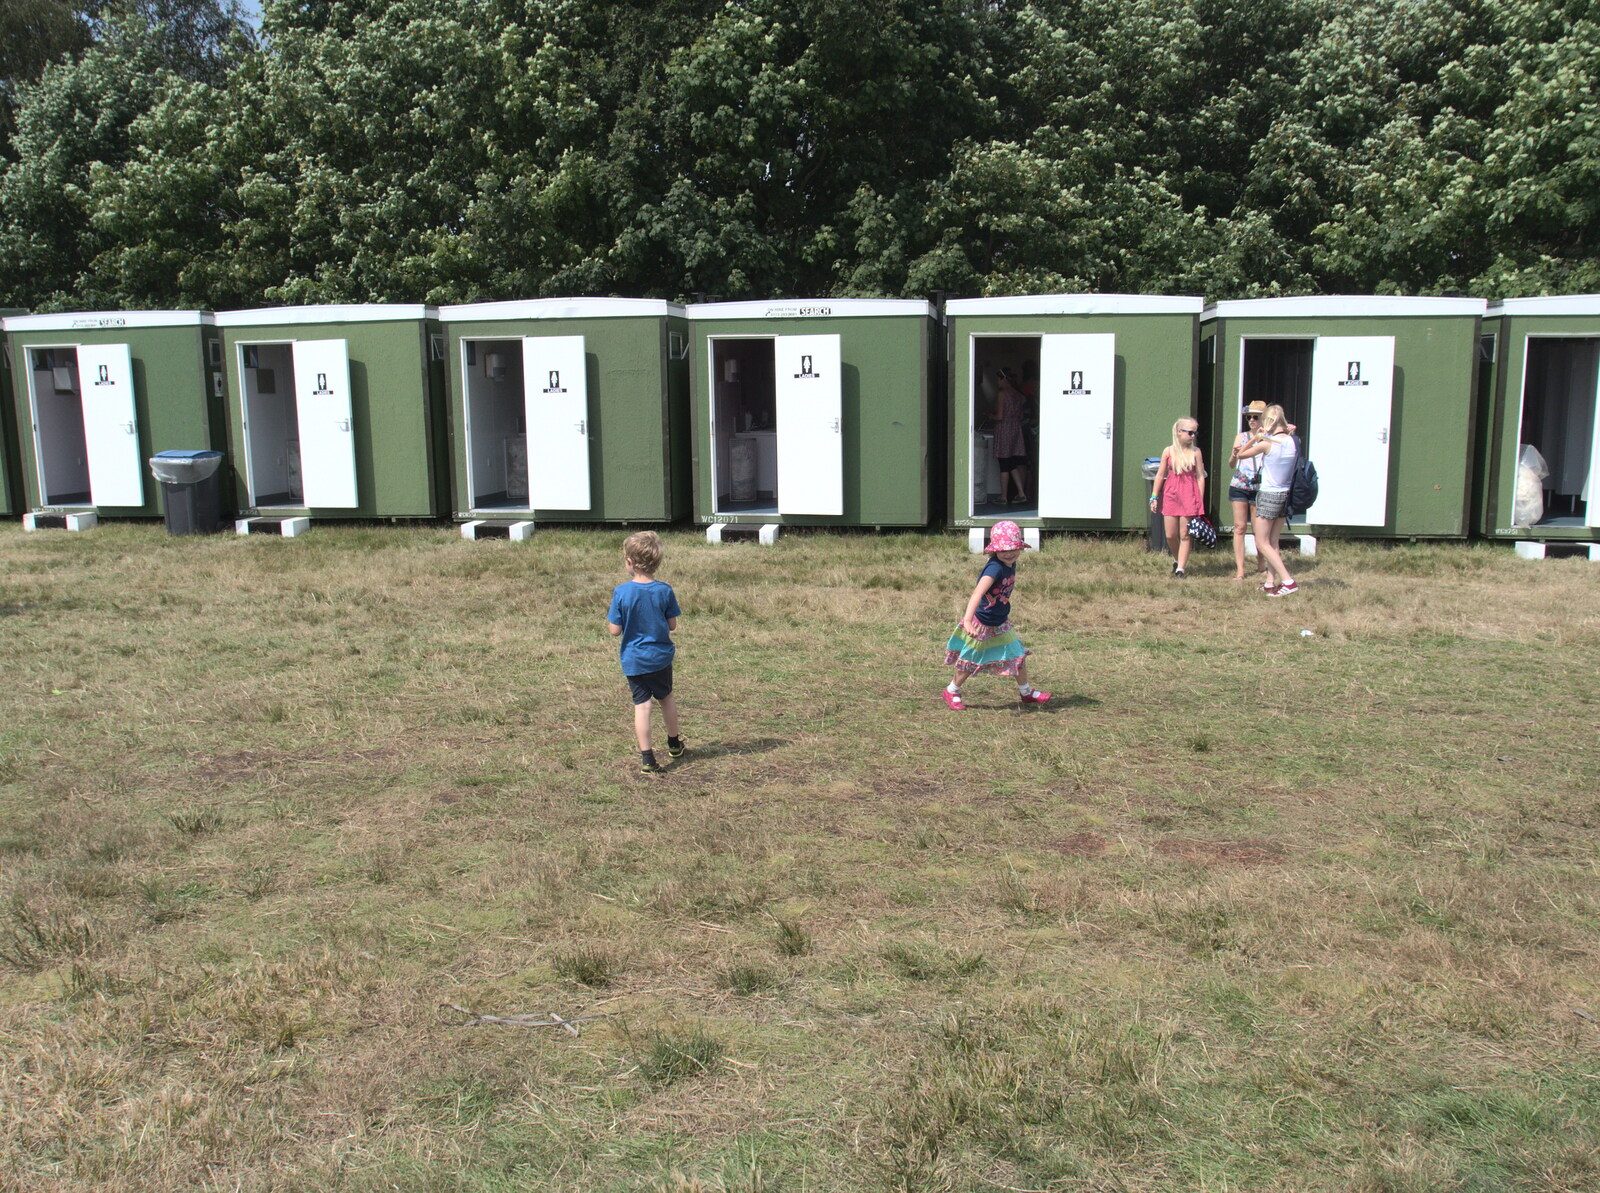 The sightly-improved family camping bogs from Latitude Festival, Henham Park, Southwold, Suffolk - 17th July 2014